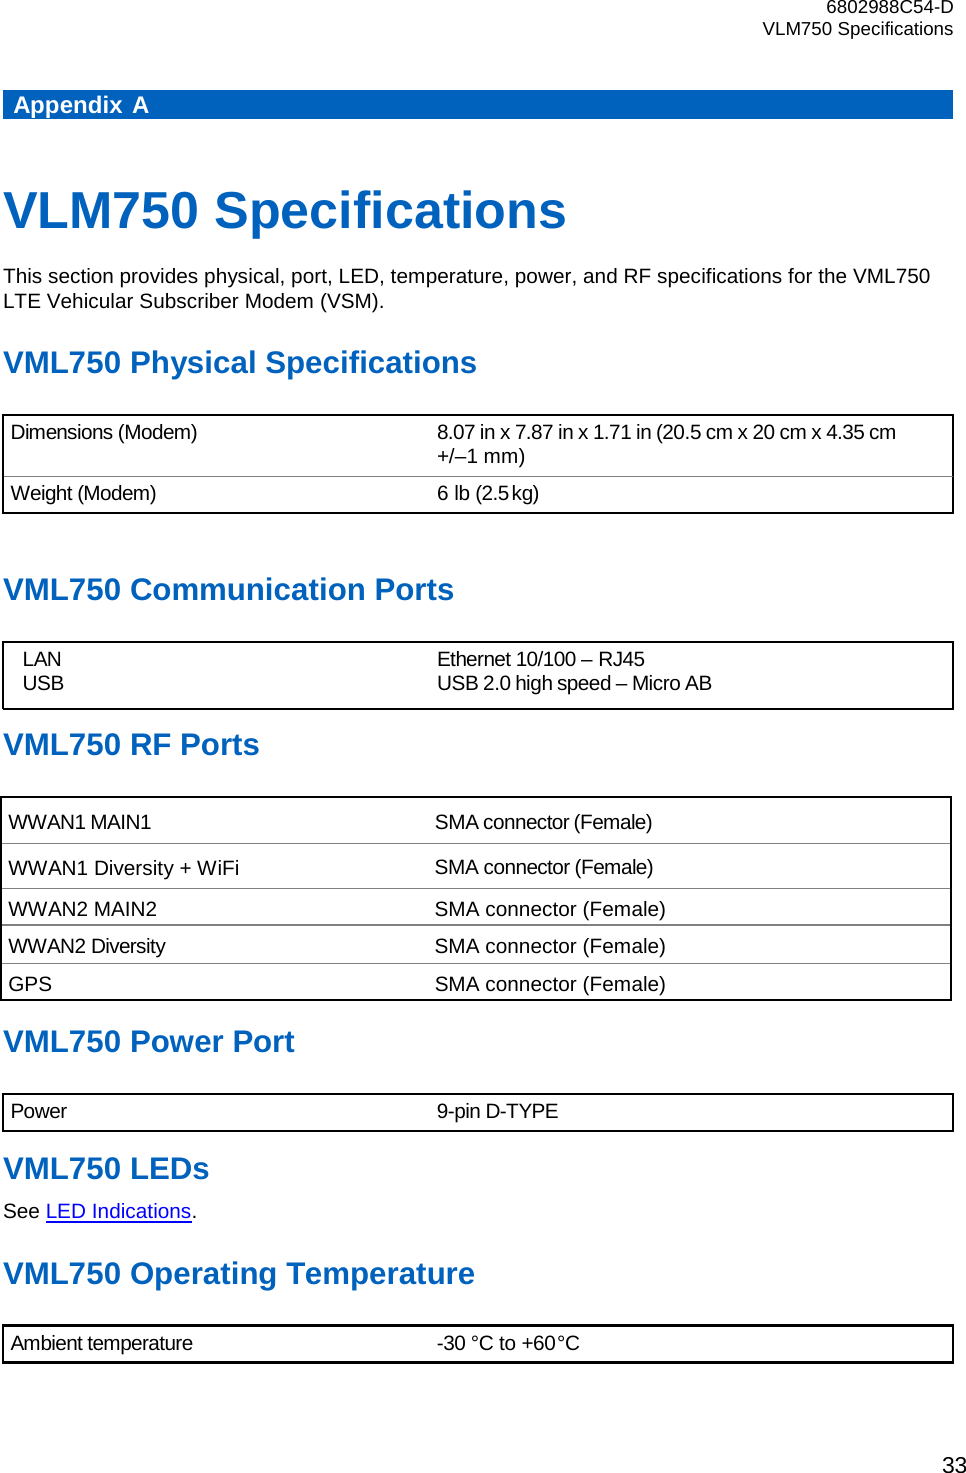 6802988C54-D VLM750 Specifications  33        Appendix A    VLM750 Specifications This section provides physical, port, LED, temperature, power, and RF specifications for the VML750 LTE Vehicular Subscriber Modem (VSM).  VML750 Physical Specifications       VML750 Communication Ports     VML750 RF Ports  WWAN1 MAIN1 SMA connector (Female) WWAN1 Diversity + WiFi SMA connector (Female)  WWAN2 MAIN2 SMA connector (Female) WWAN2 Diversity  SMA connector (Female) GPS SMA connector (Female)  VML750 Power Port   VML750 LEDs See LED Indications.  VML750 Operating Temperature  Power  9-pin D-TYPE Ambient temperature  -30 °C to +60 °C  Ethernet 10/100 – RJ45 USB 2.0 high speed – Micro AB LAN  USB  Dimensions (Modem) 8.07 in x 7.87 in x 1.71 in (20.5 cm x 20 cm x 4.35 cm +/–1 mm) Weight (Modem) 6 lb (2.5 kg) 